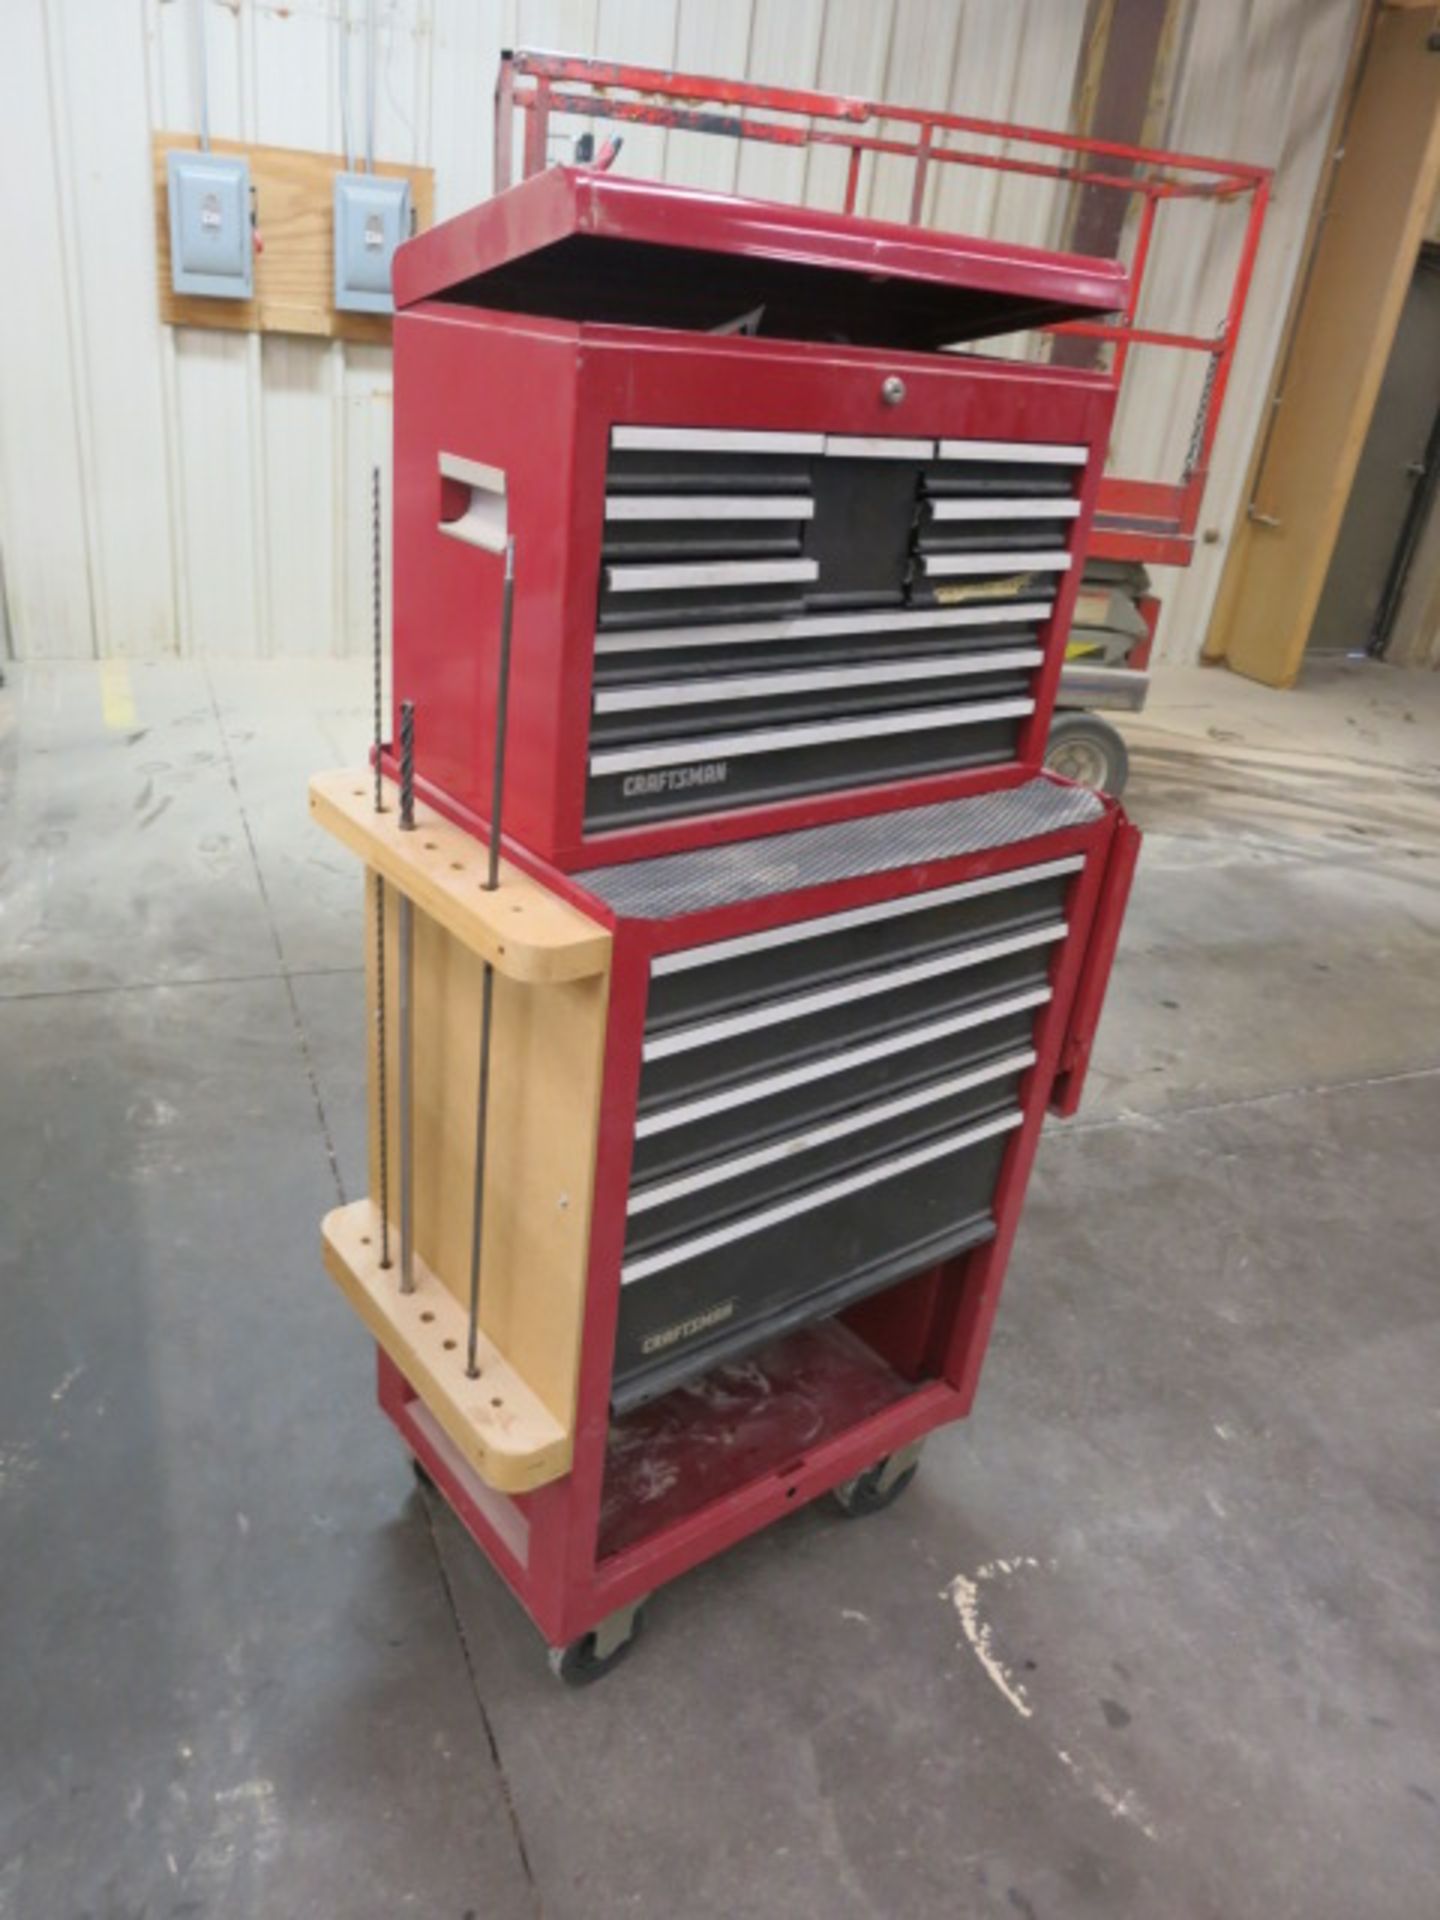 Craftsman Tool Cabinet with Contents - removal available October 26, 2018 - Bild 4 aus 4